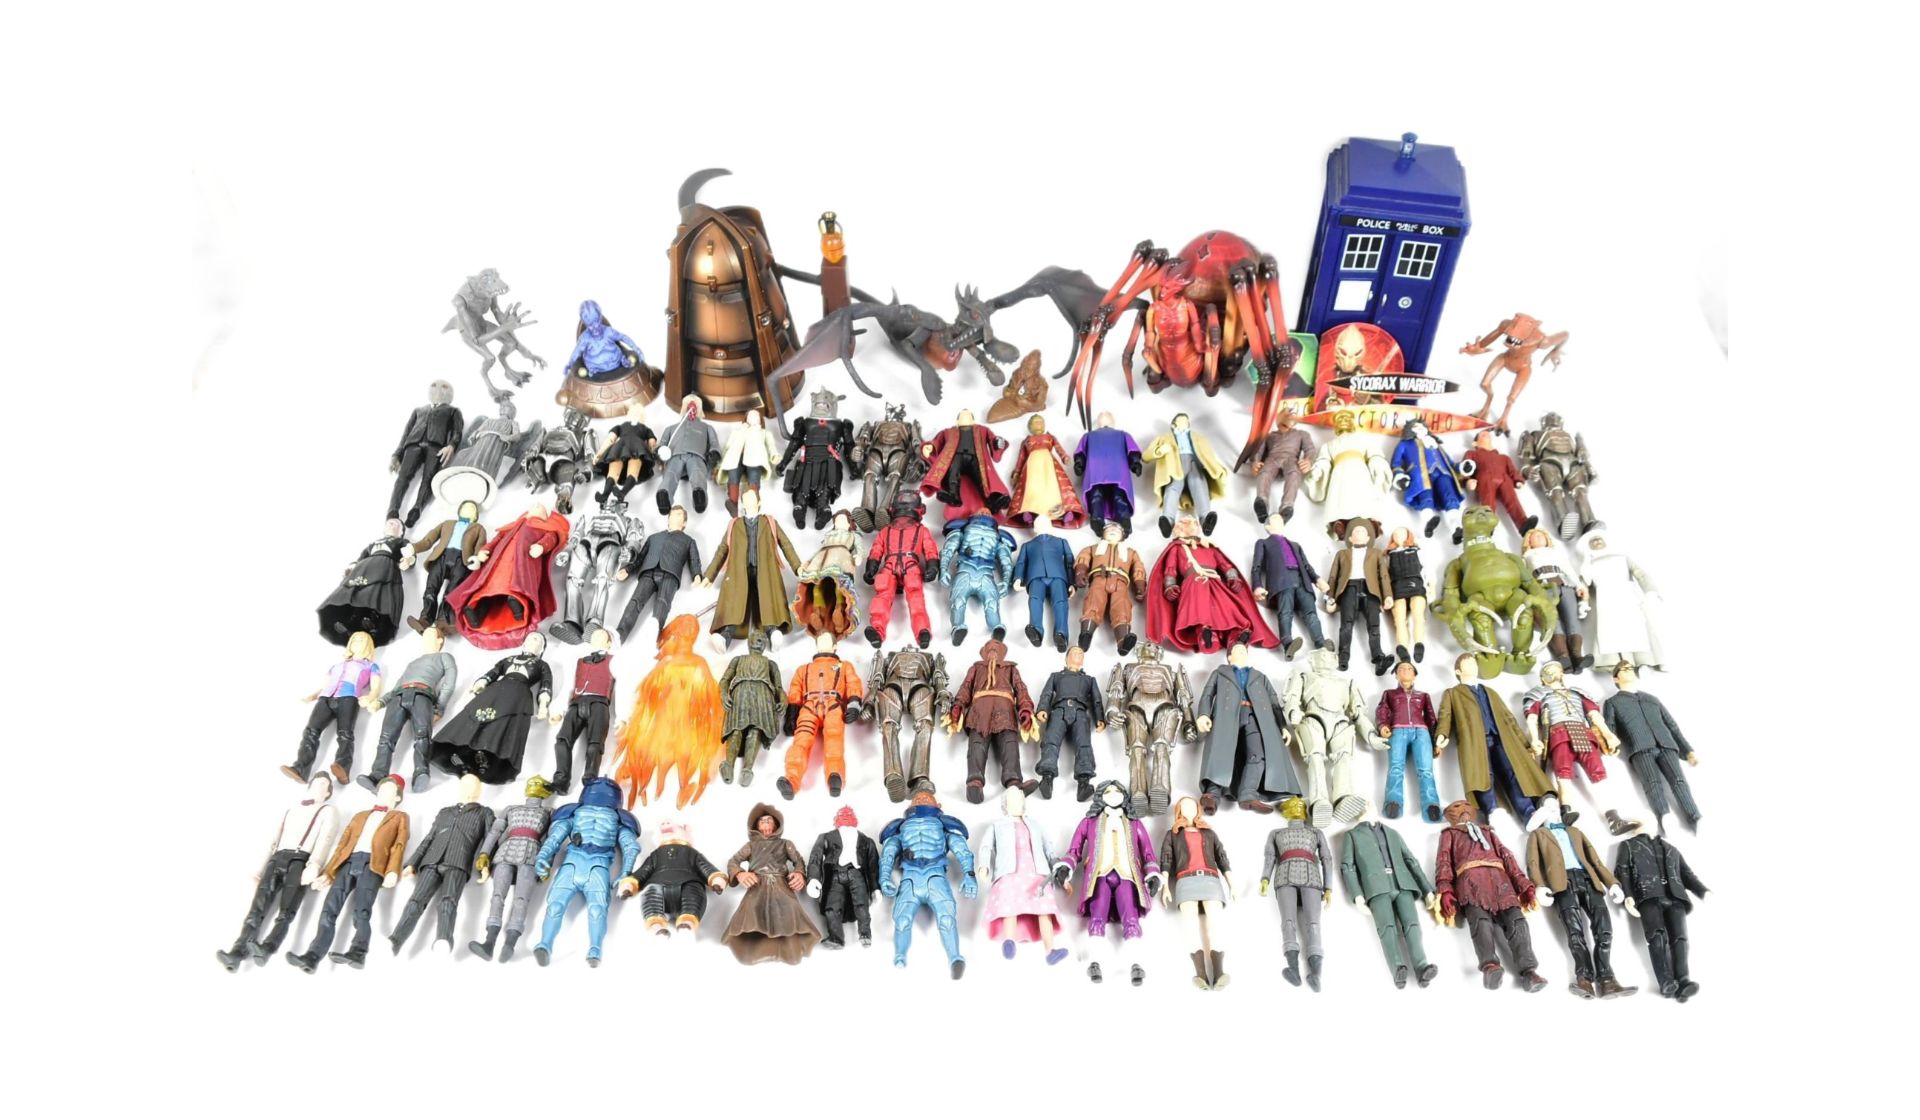 DOCTOR WHO - CHARACTER OPTIONS - ACTION FIGURES - Image 2 of 10